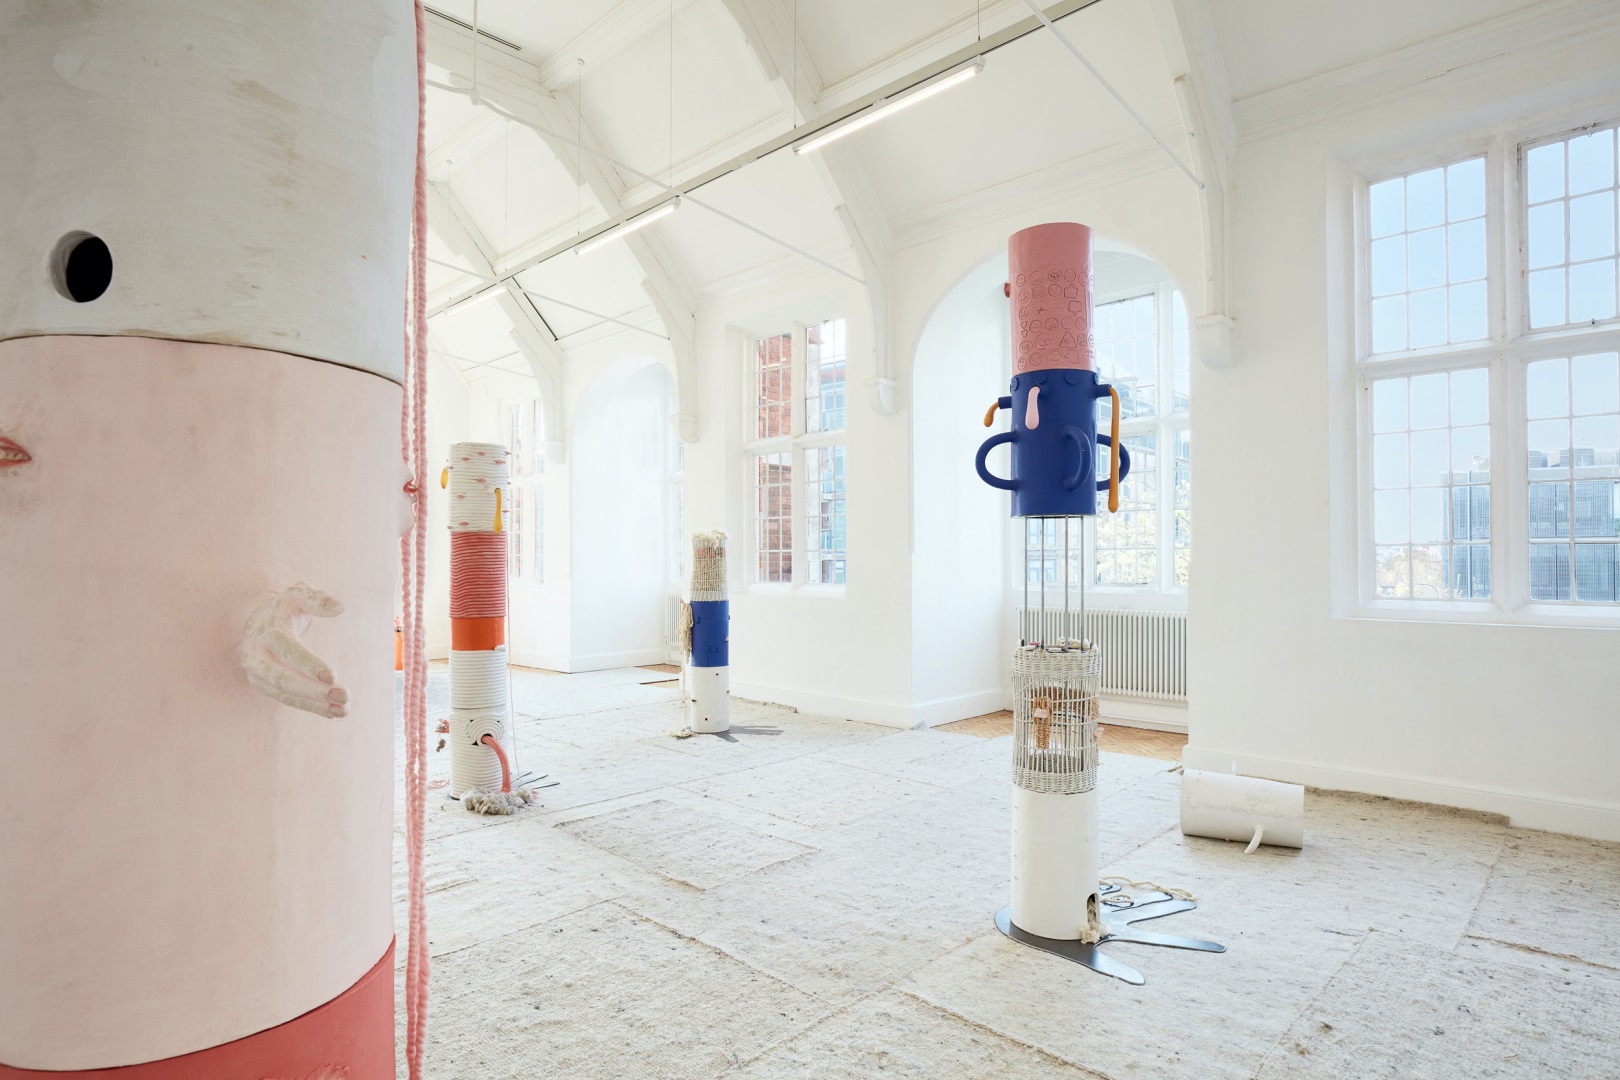 Art installation by Jonathan Baldock - a white room with brightly coloured art pieces